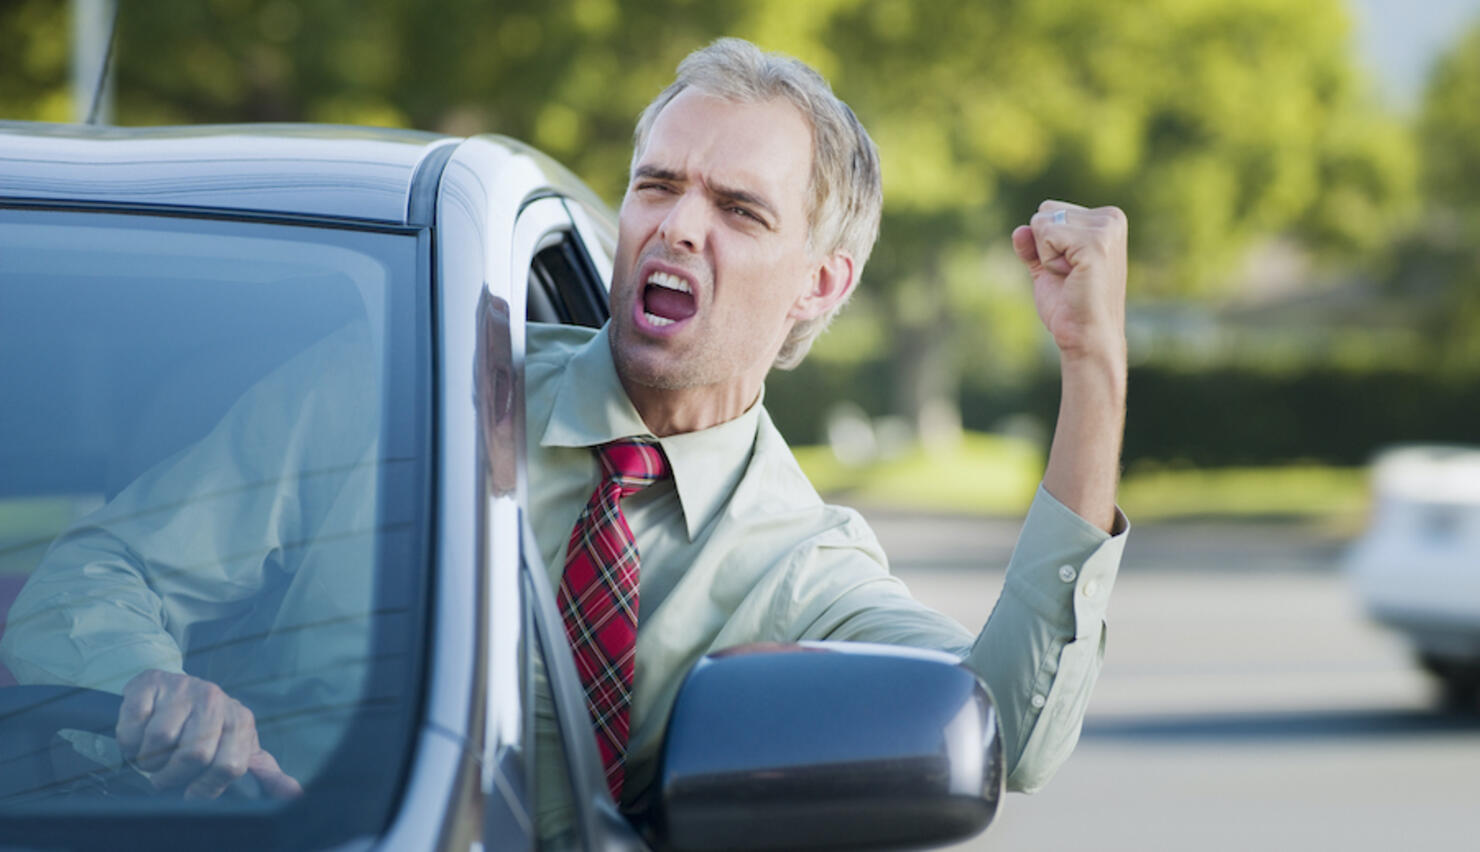 Angry driver shouting out car window